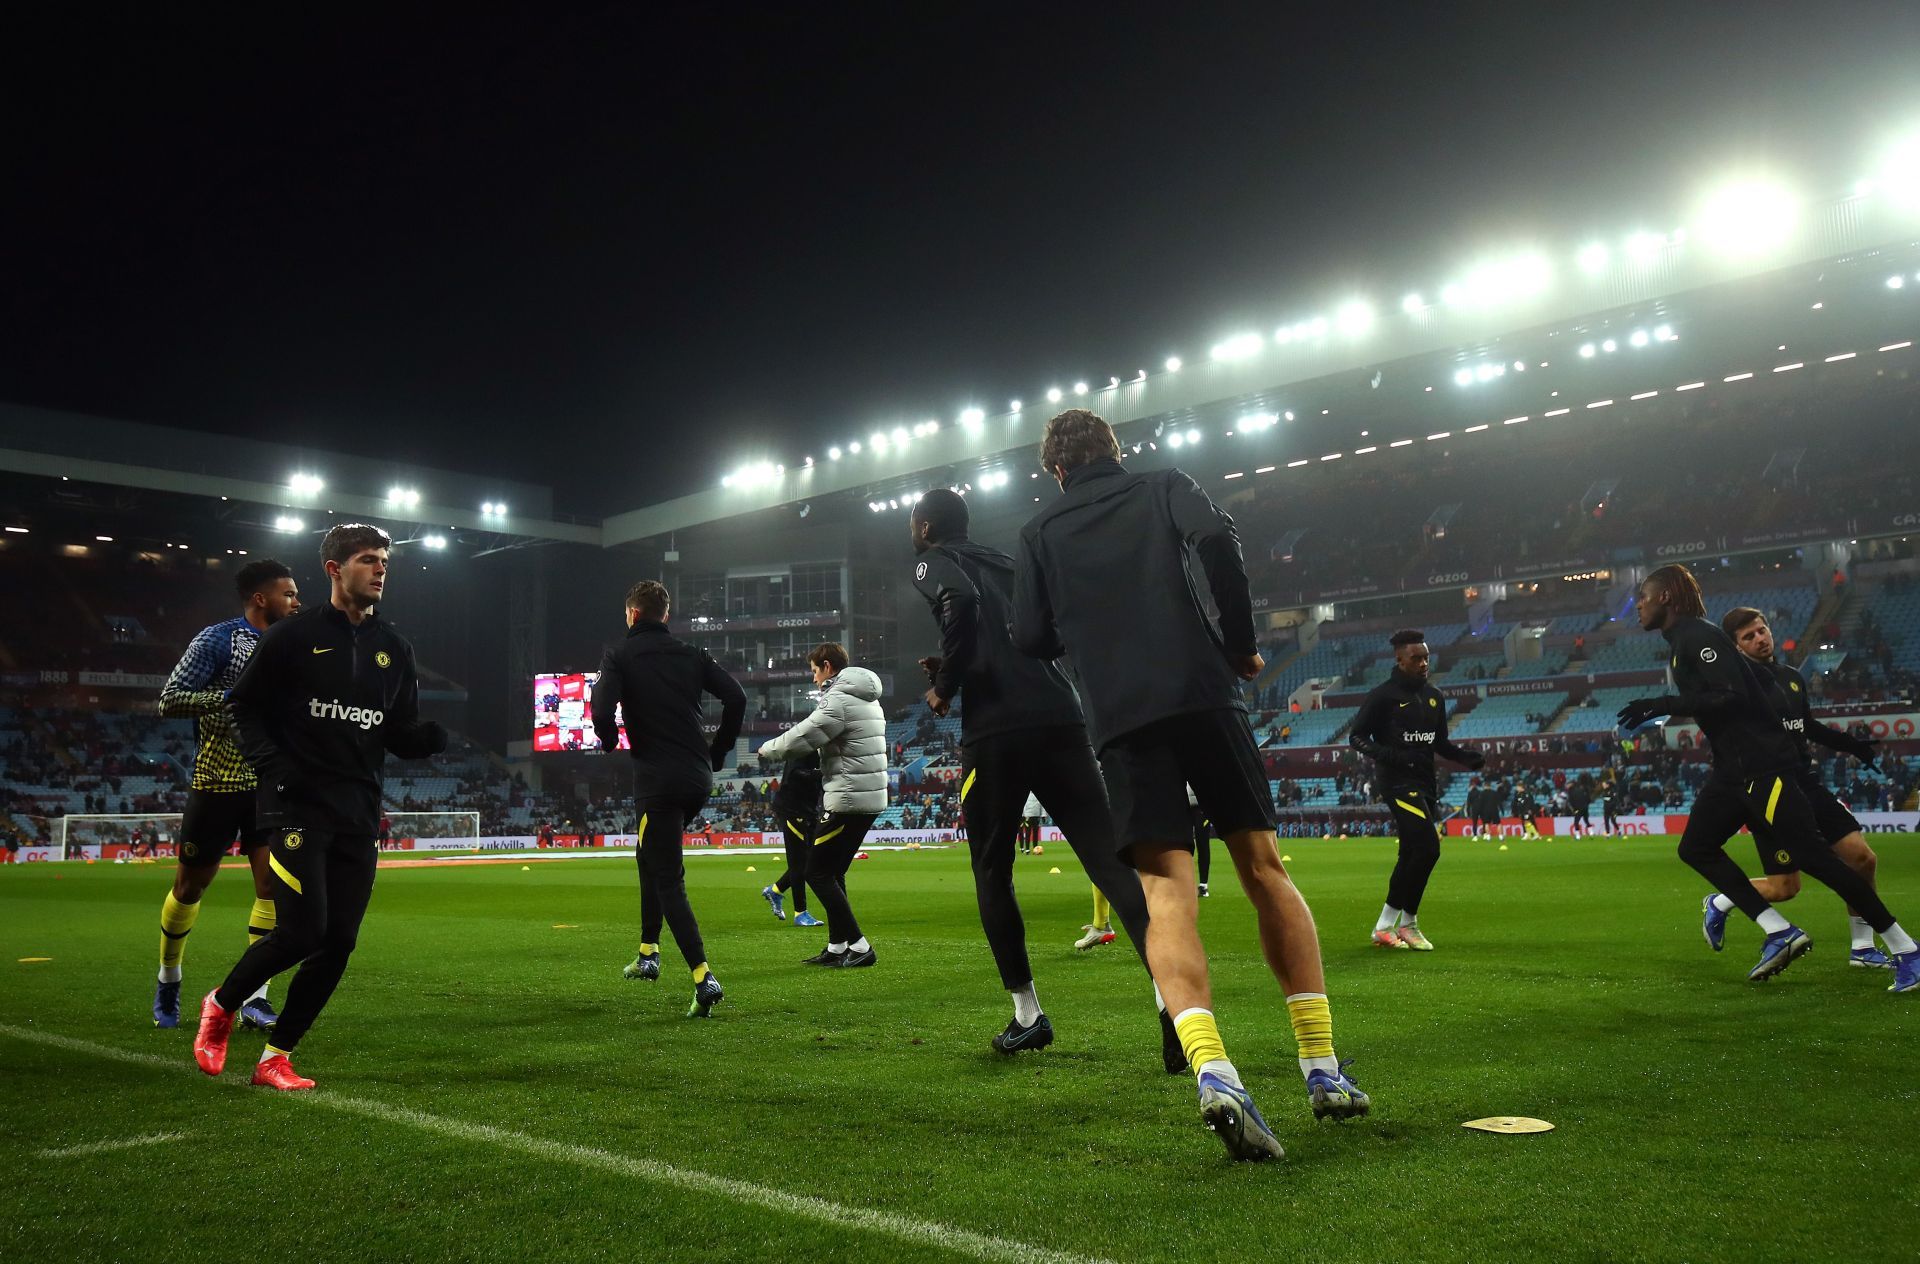 Players warming up before a Premier League match